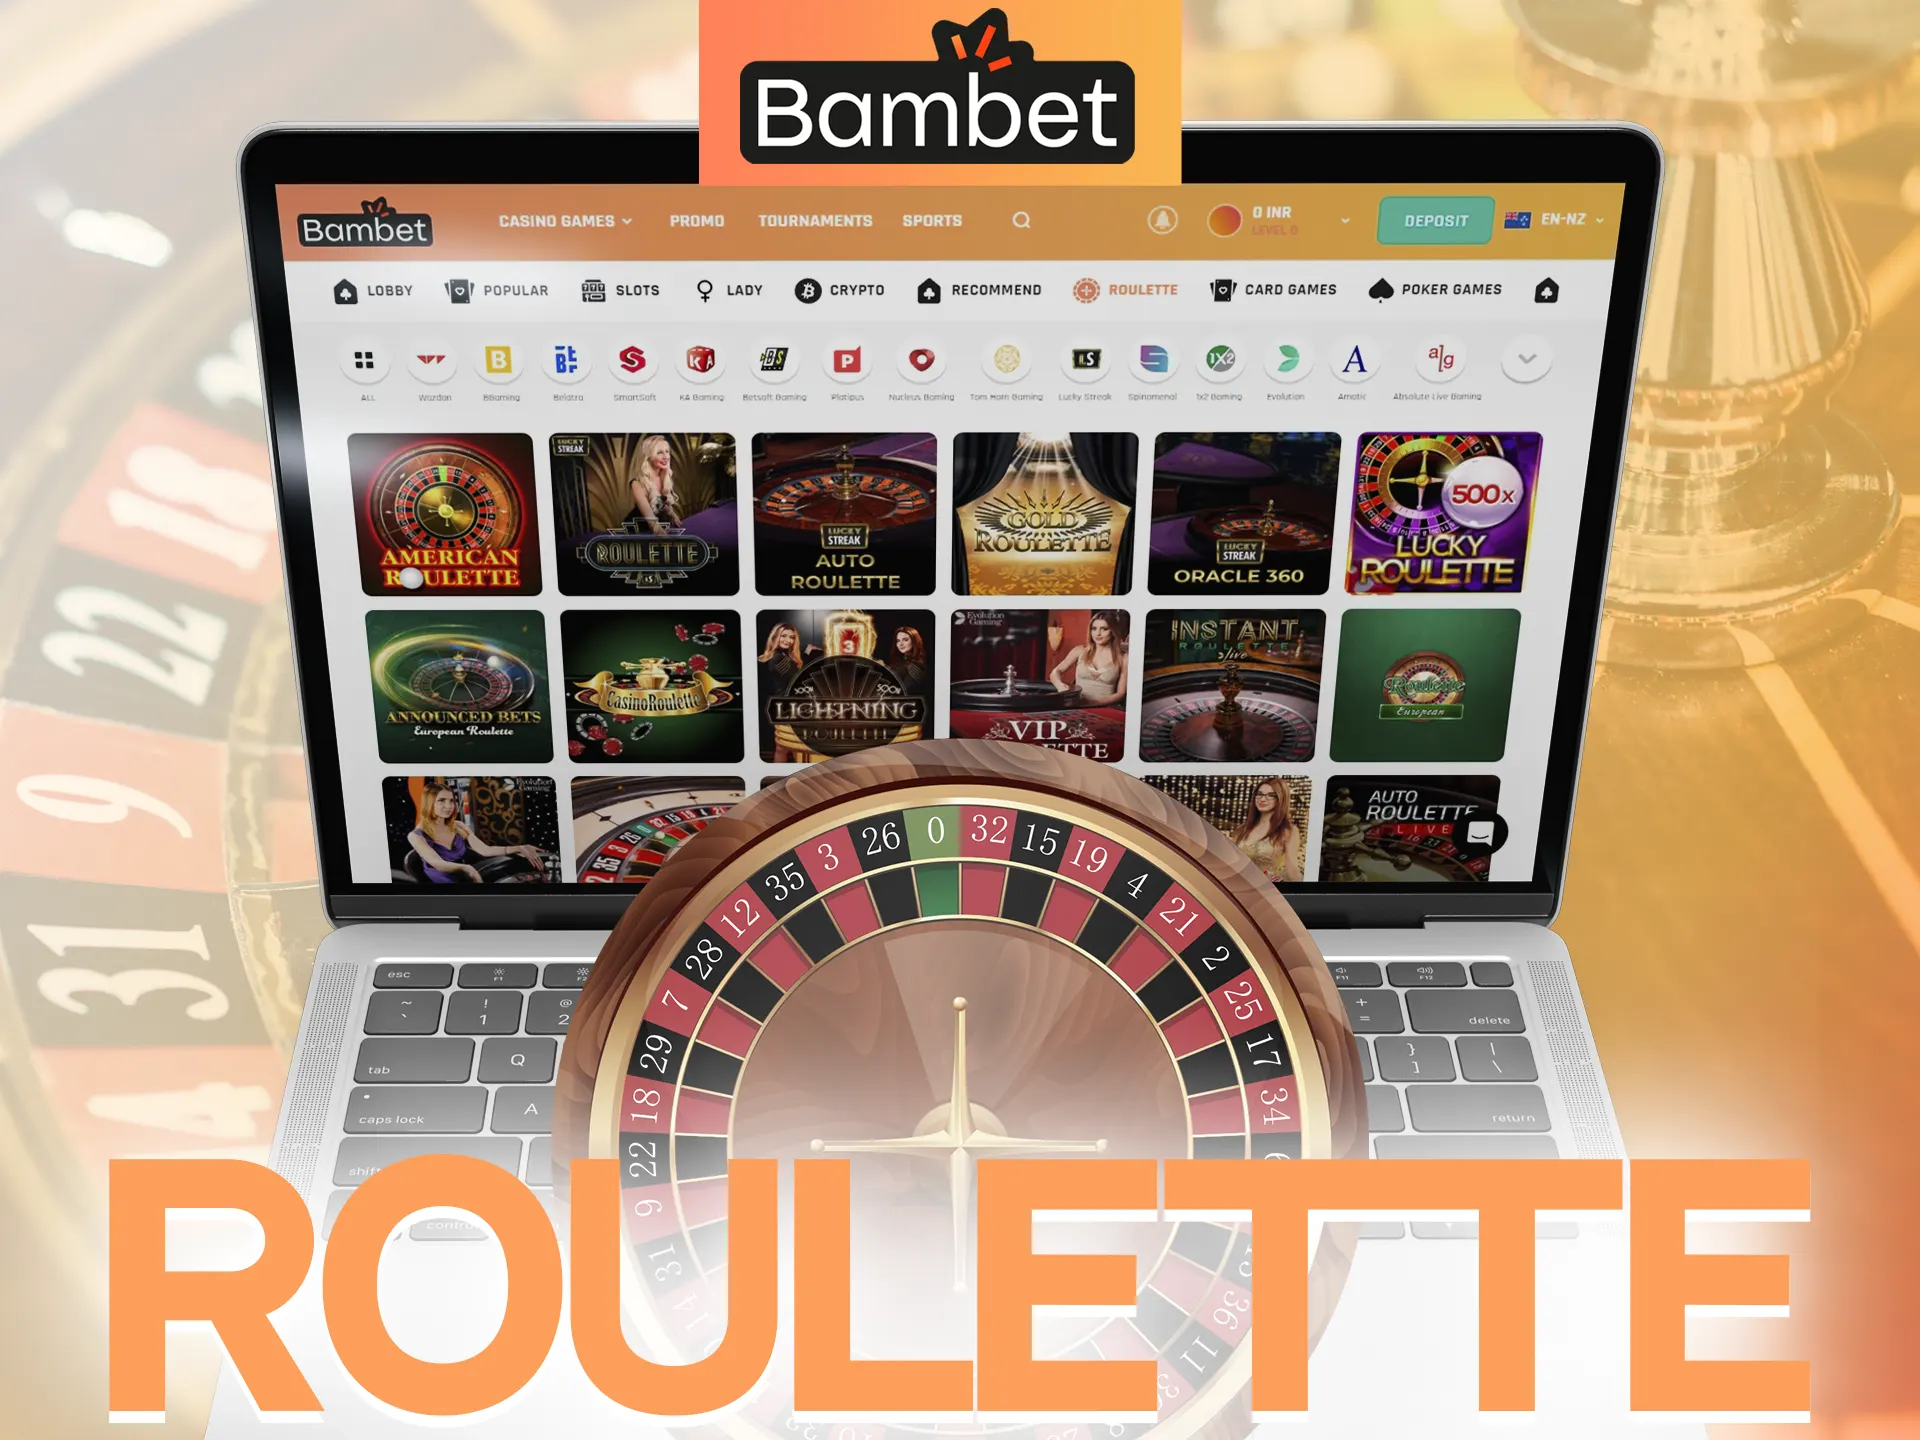 Try your luck at roulette on Bambet.